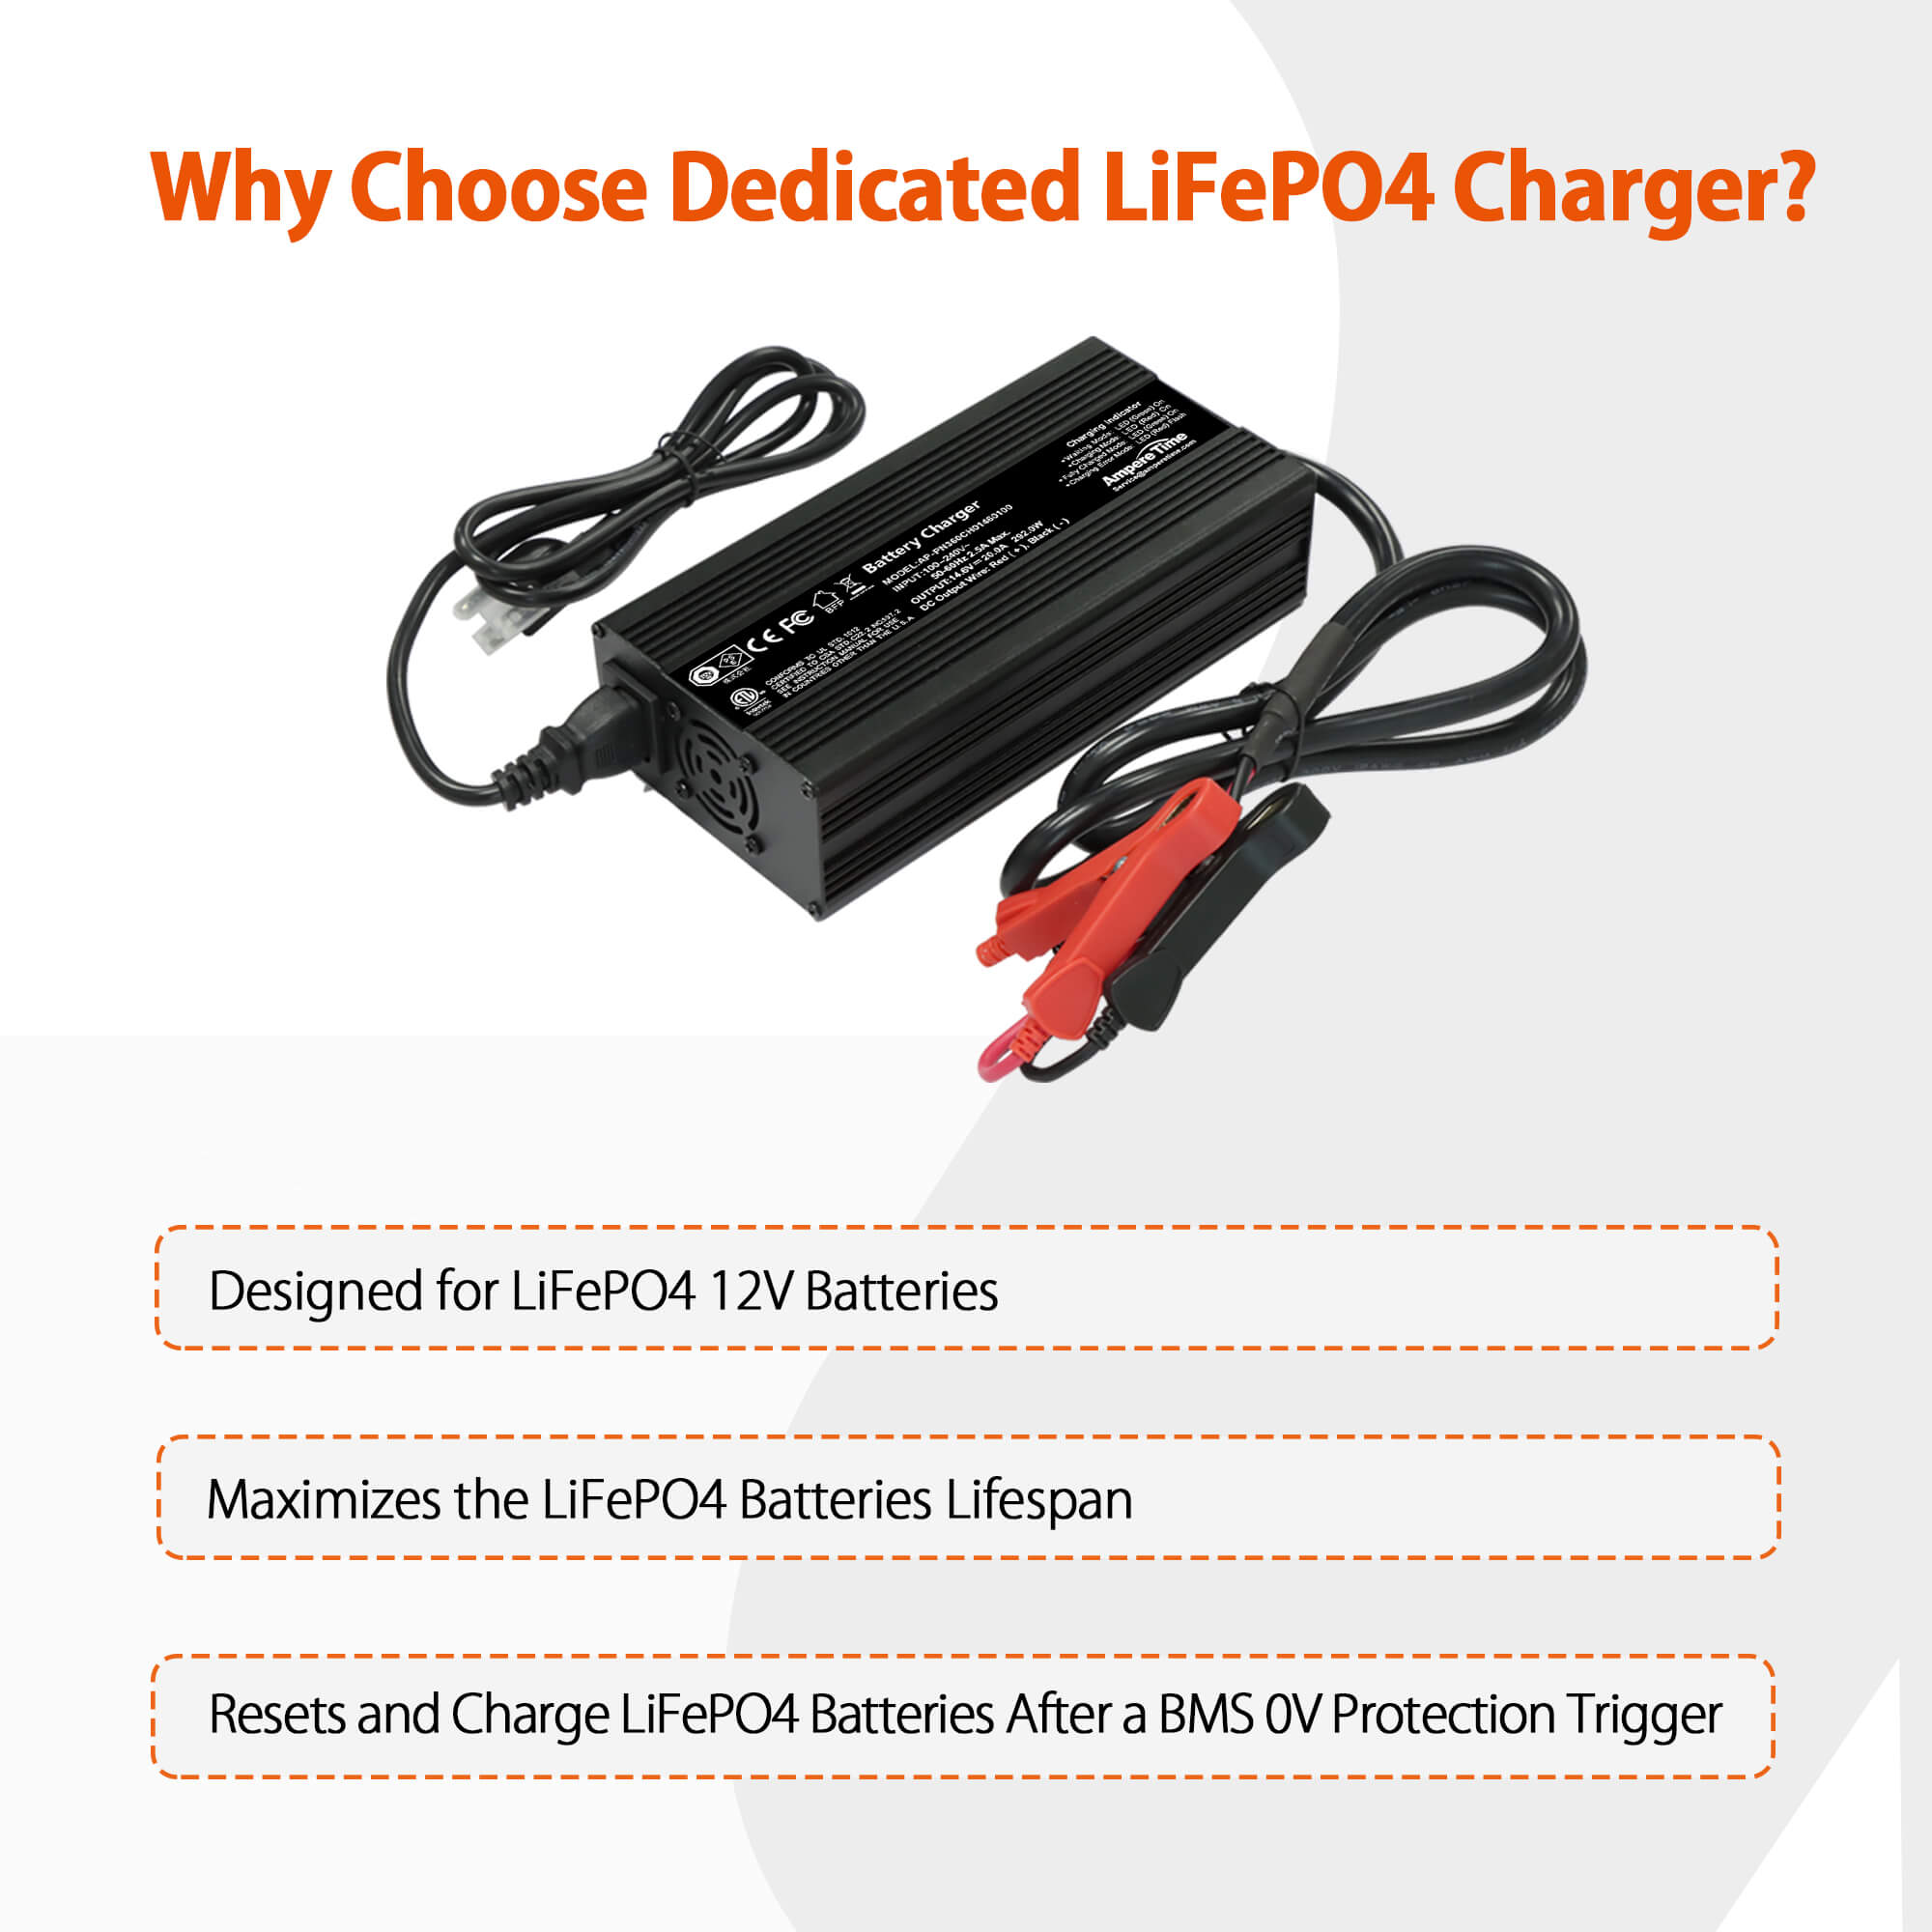 Ampere Time 14.6V 20A Dedicated LiFePO4 Battery Charger